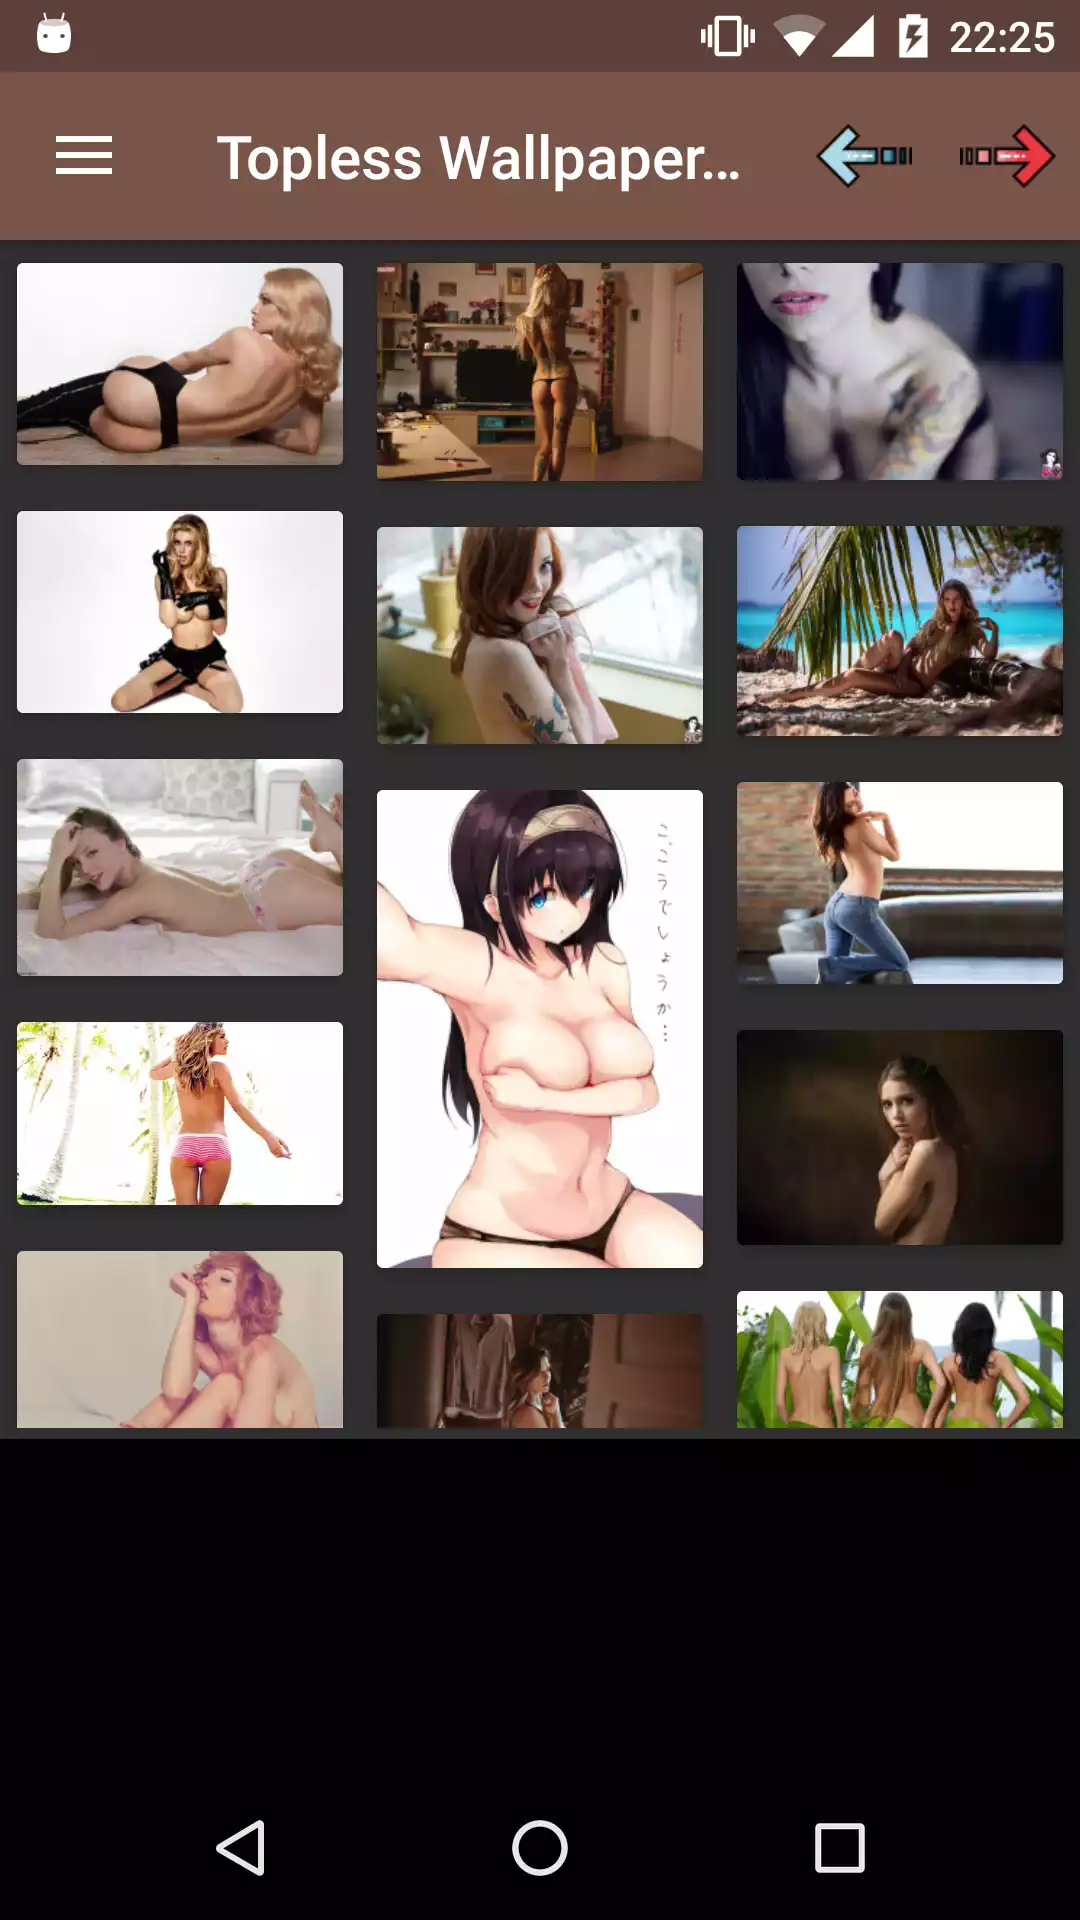 Topless backgrounds hentai,erotic,sexy,wallpapers,pictures,teen,anime,gallery,pic,adultwallpapers,android,porn,pornstars,apk,hentie,backgrounds,sexygalleries,pics,app,download,picture